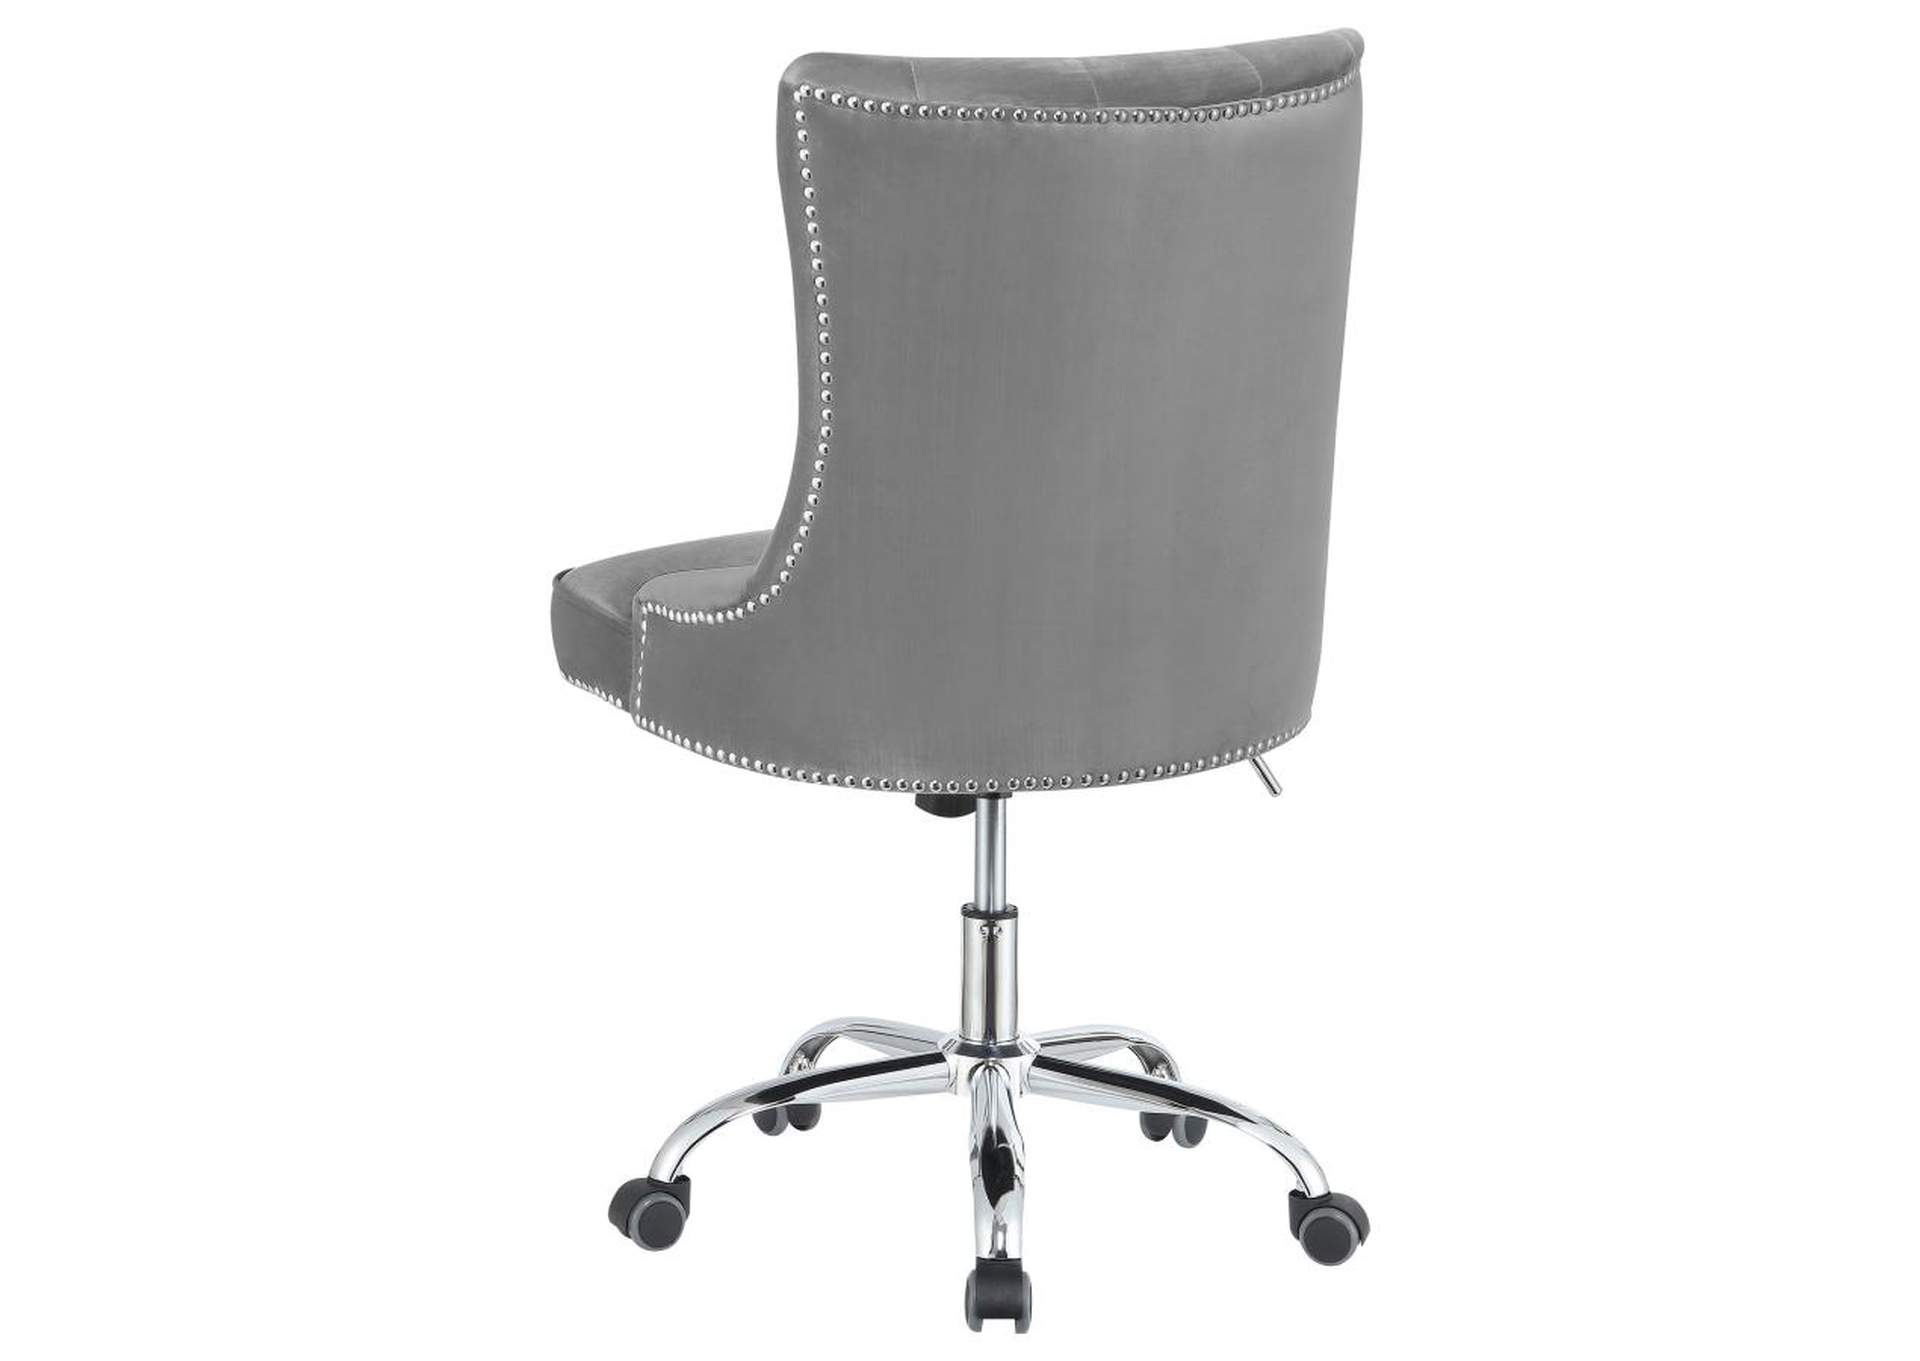 Torrance Tufted Back Office Chair Grey And Chrome,Coaster Furniture